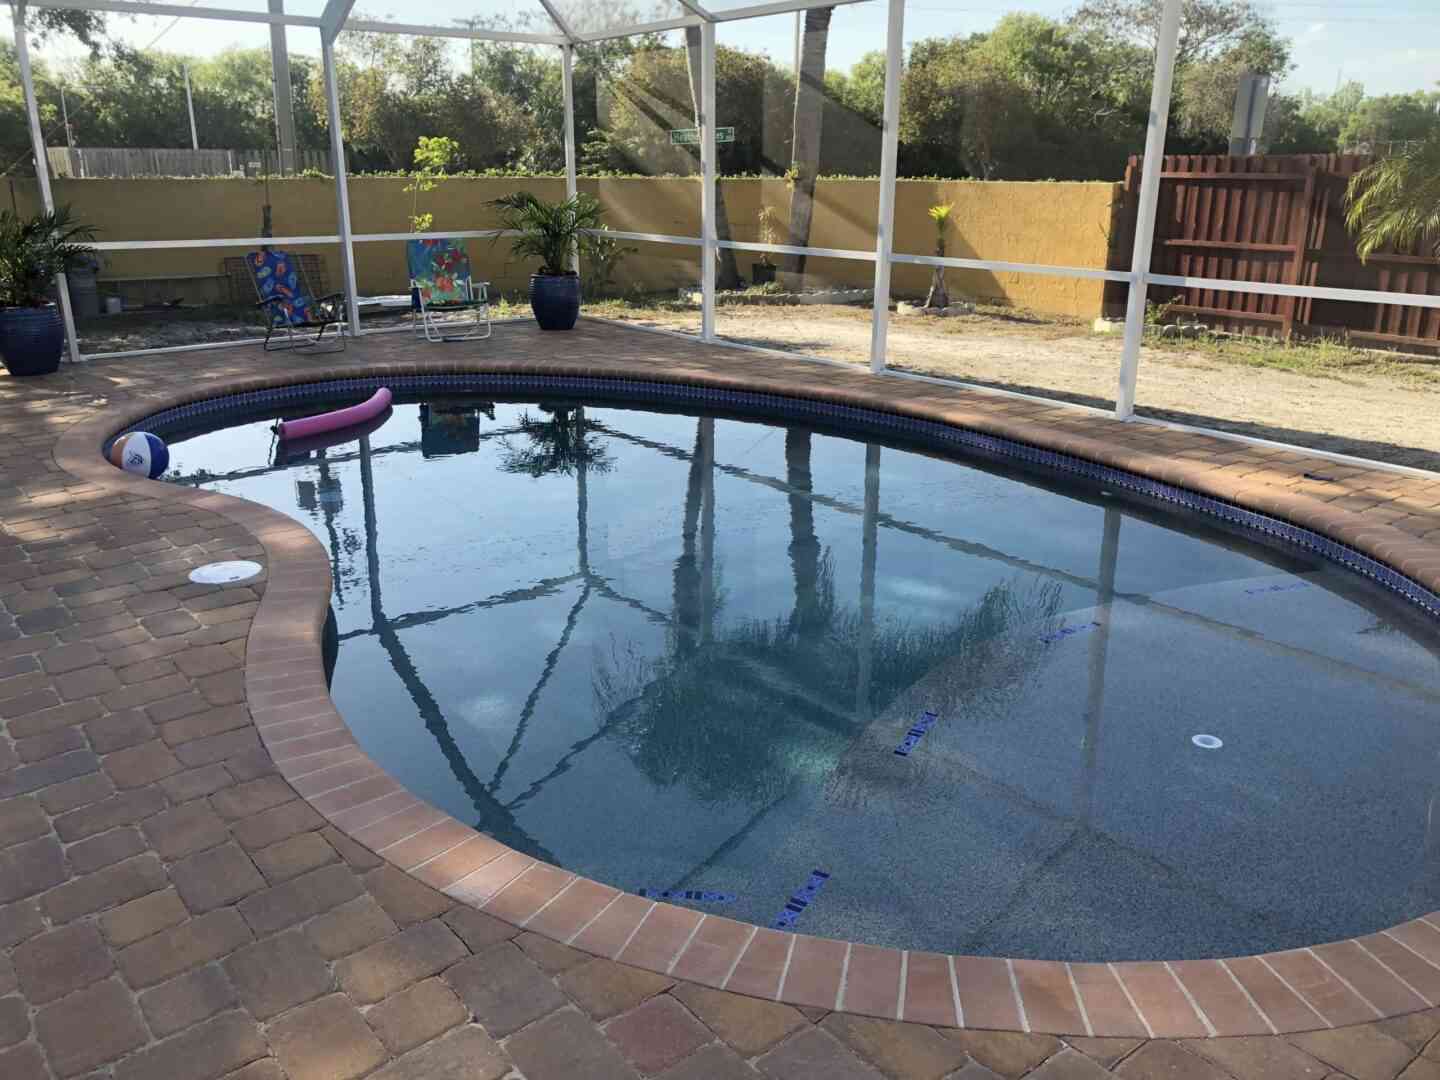 A round pool